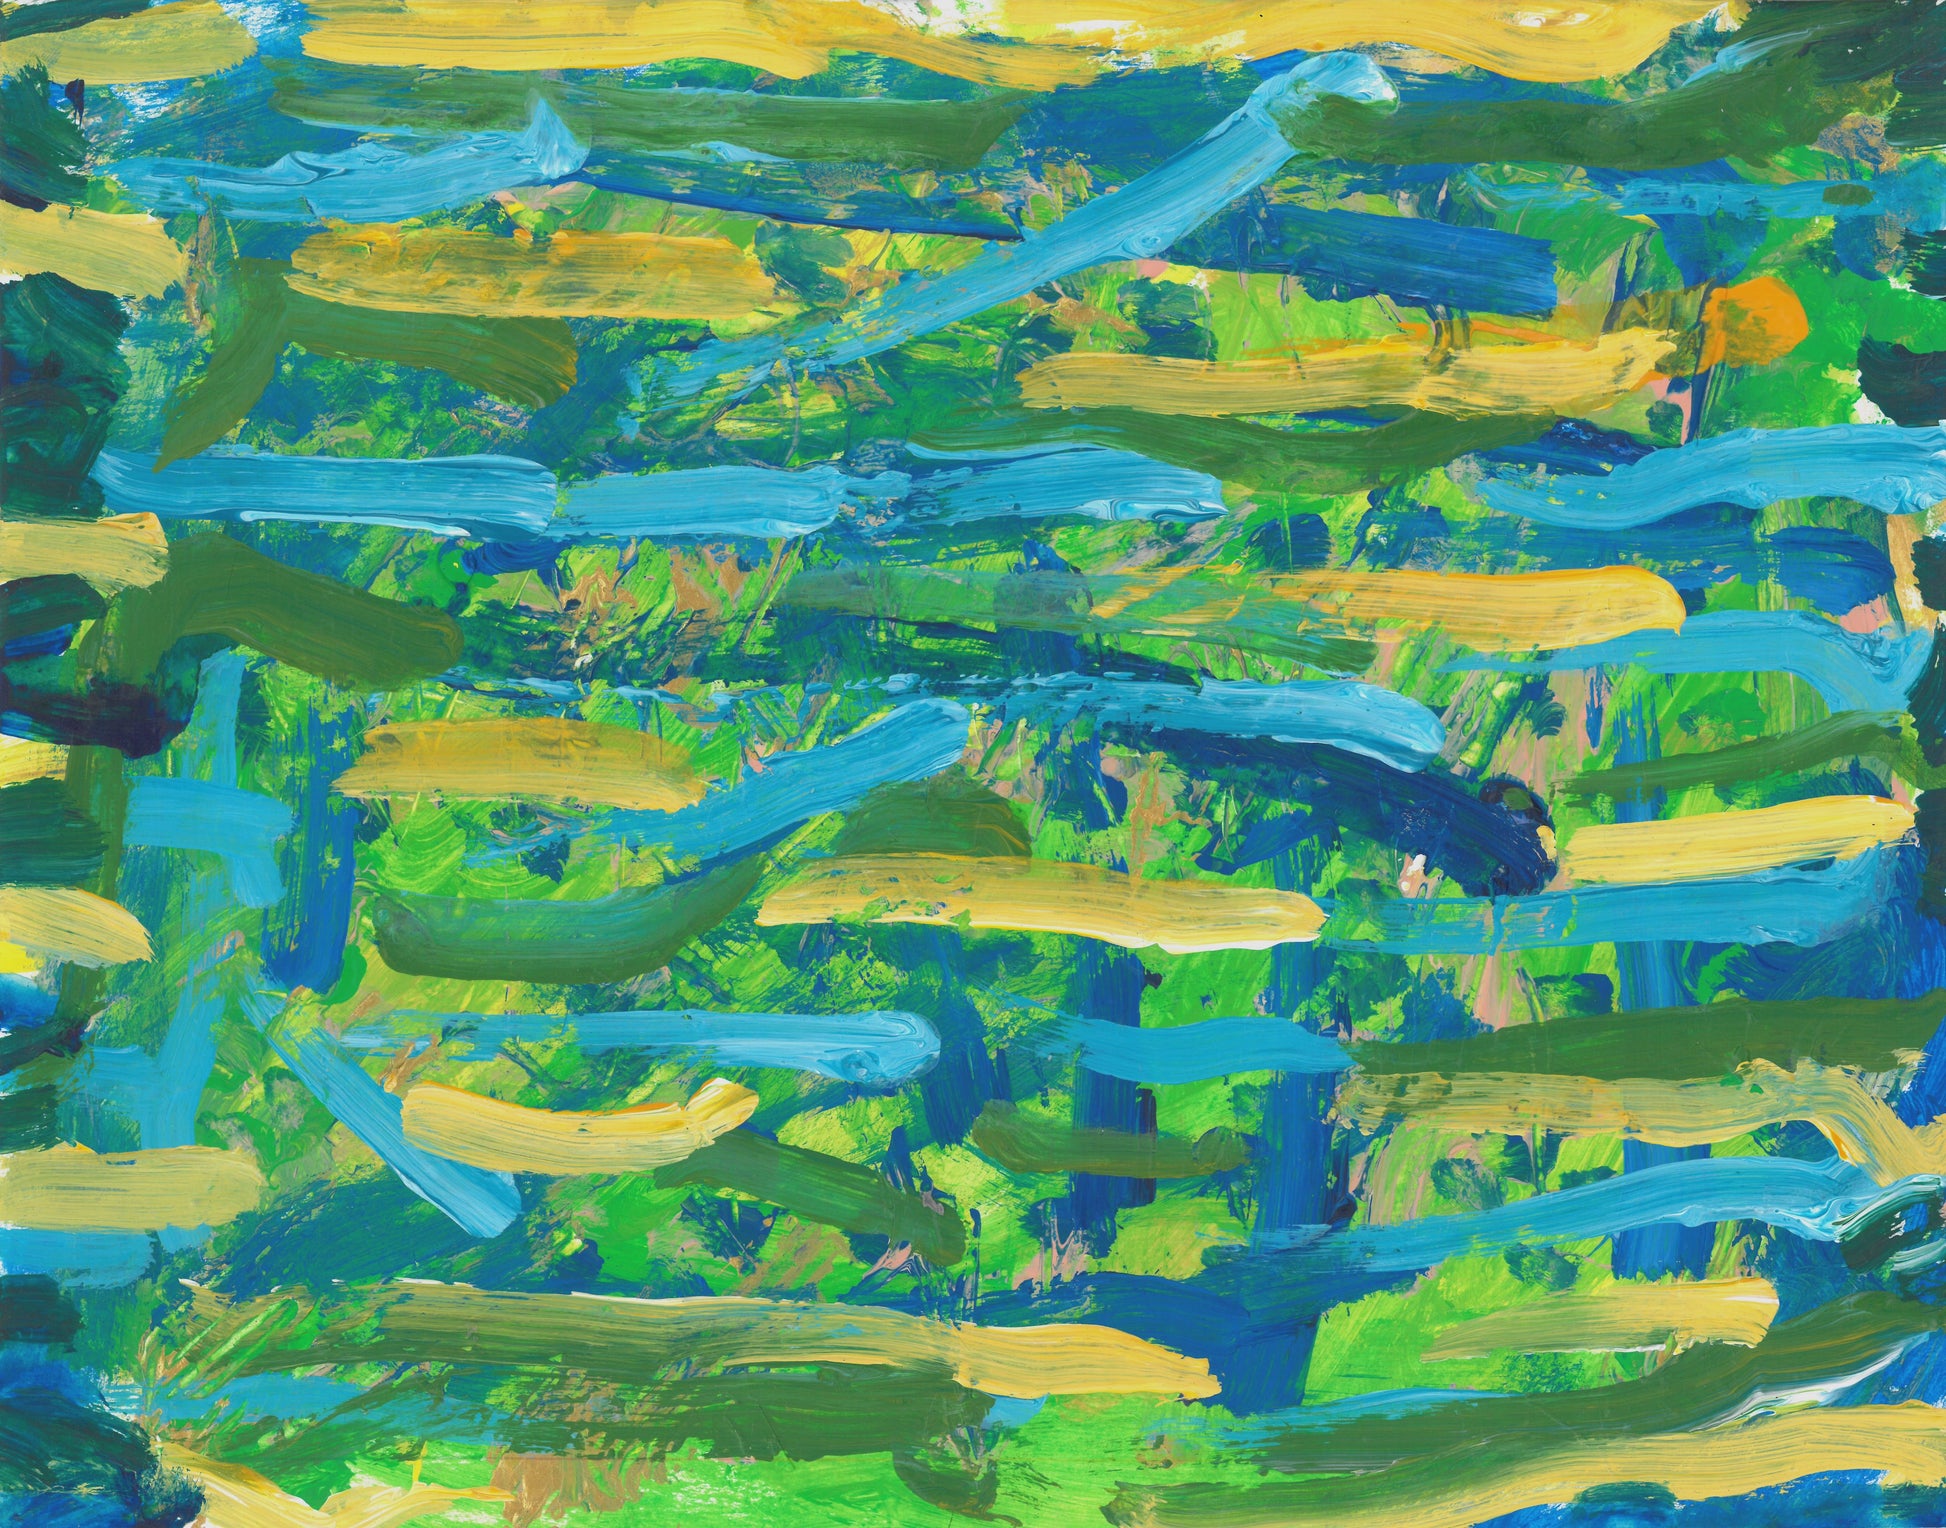 This is a painting of green, blue, and yellow horizontal lines in abstract form.